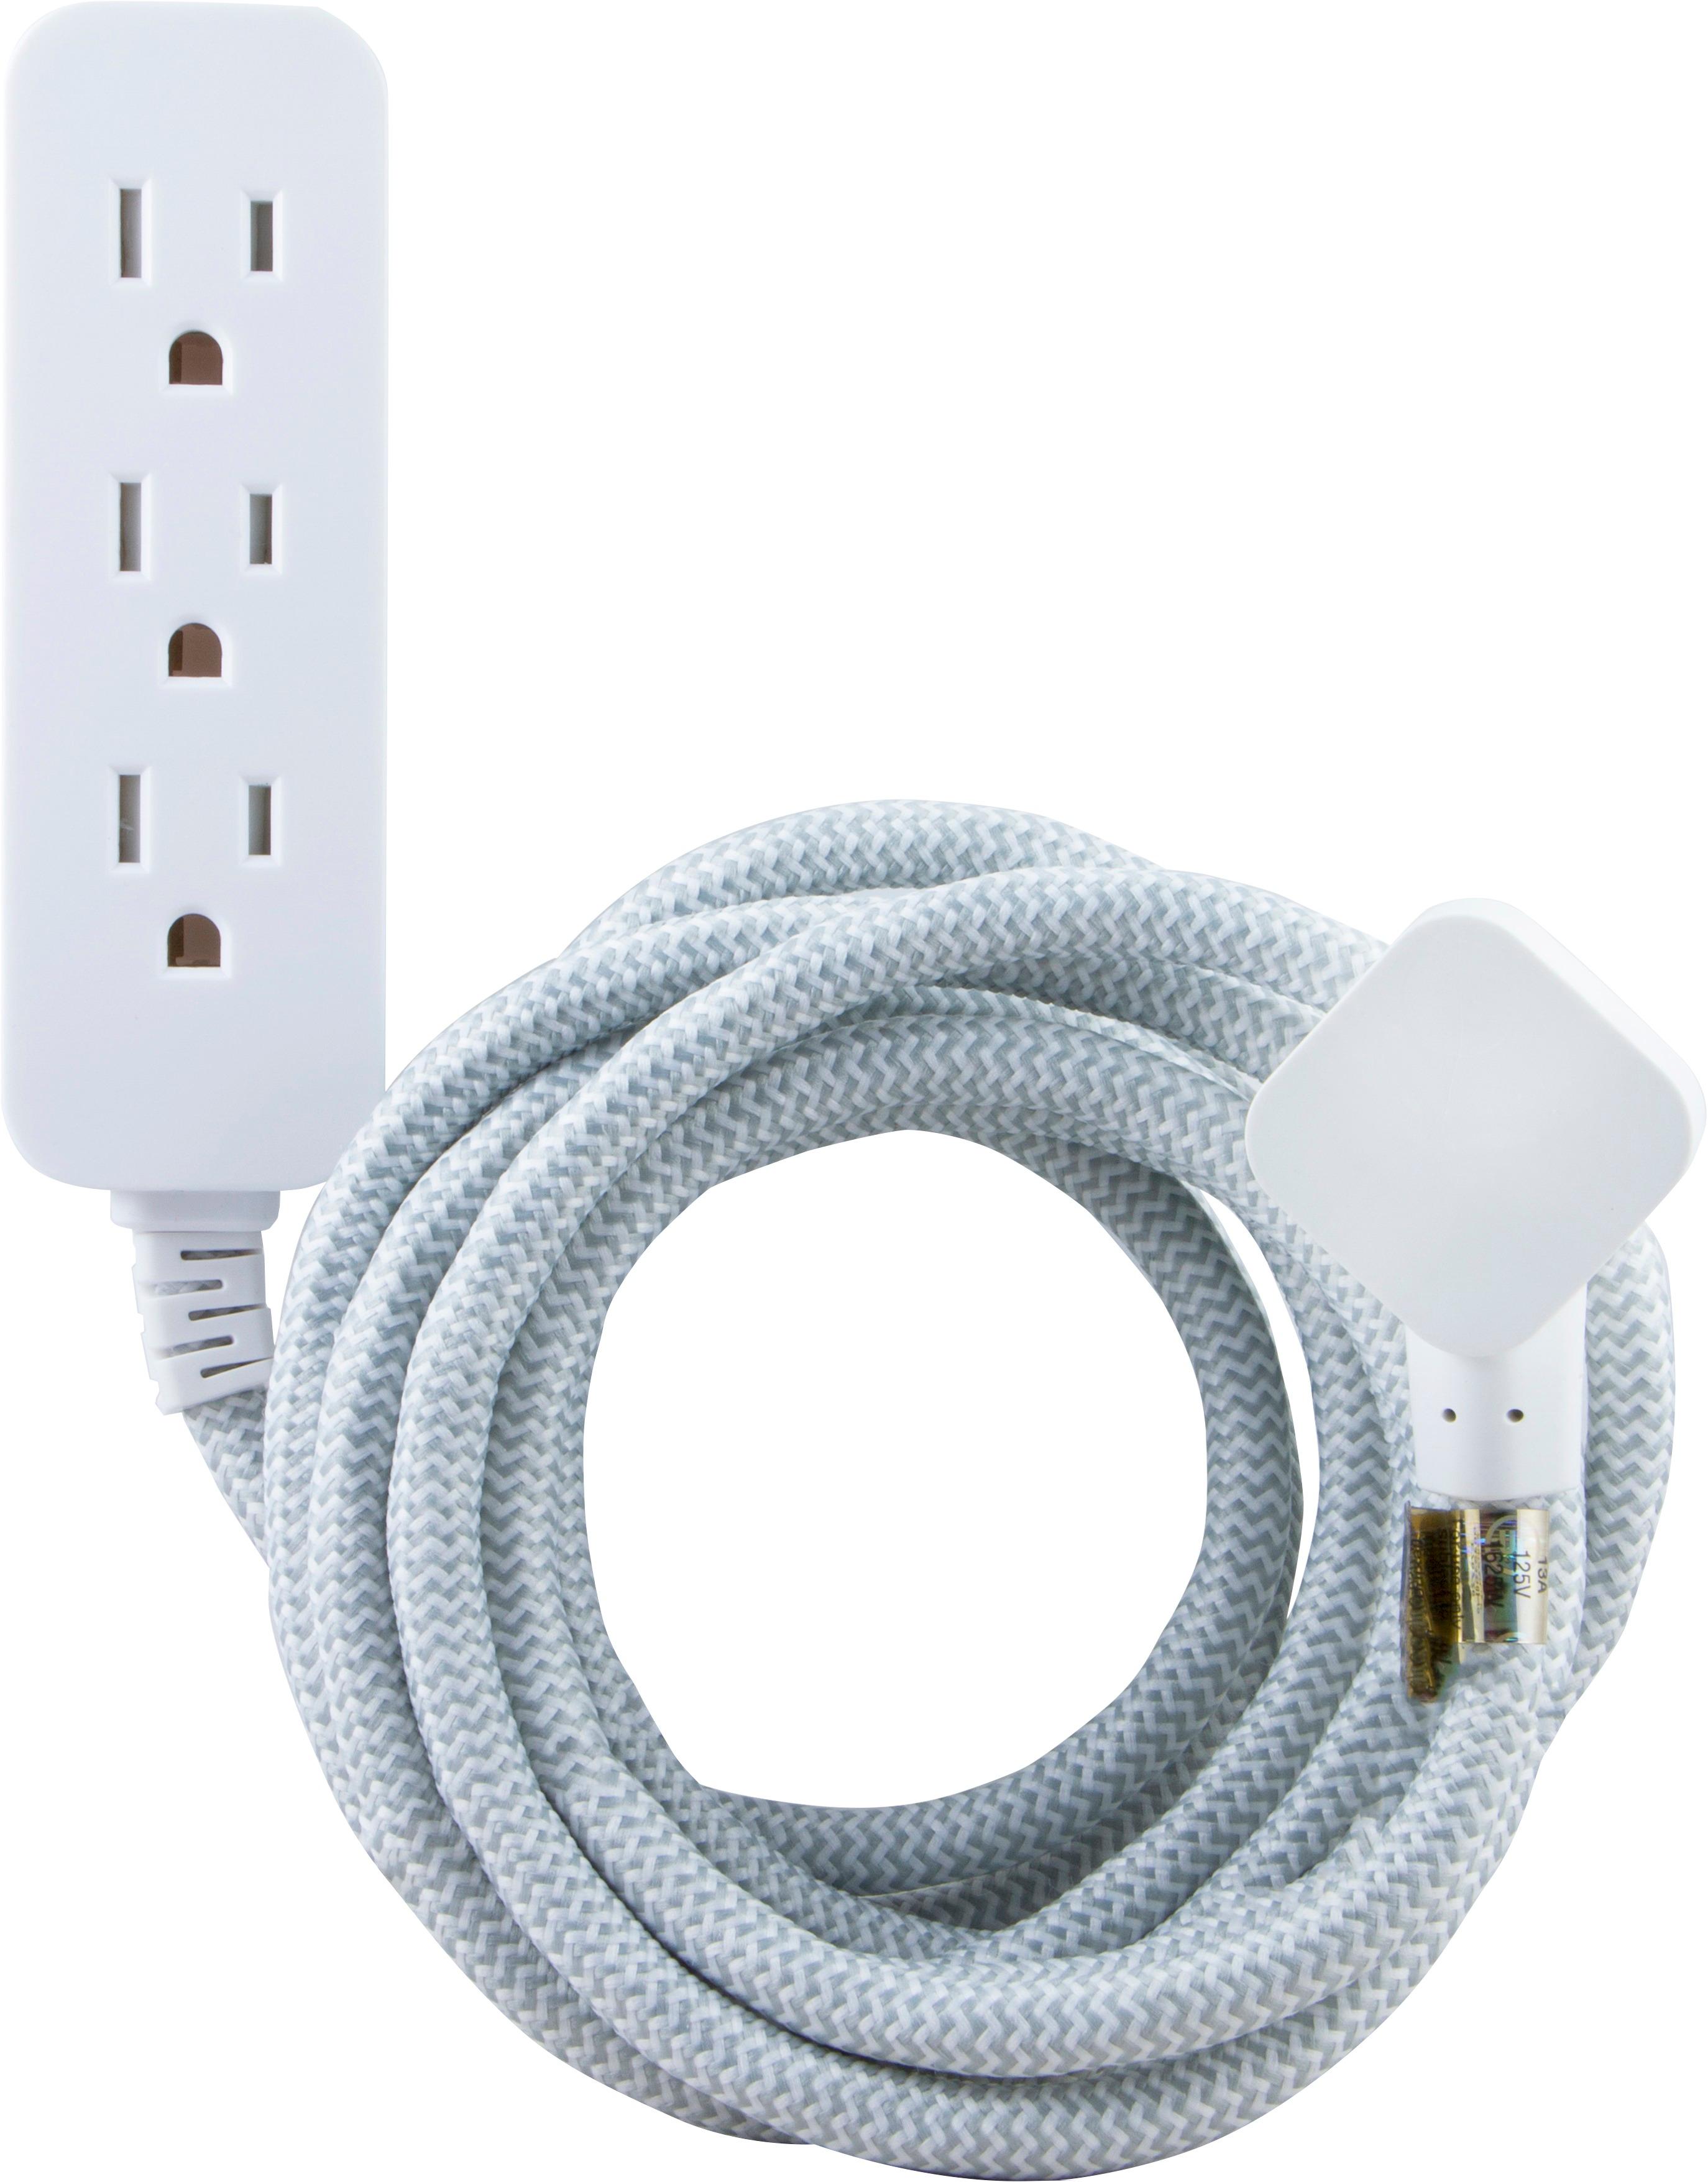 power cord extension